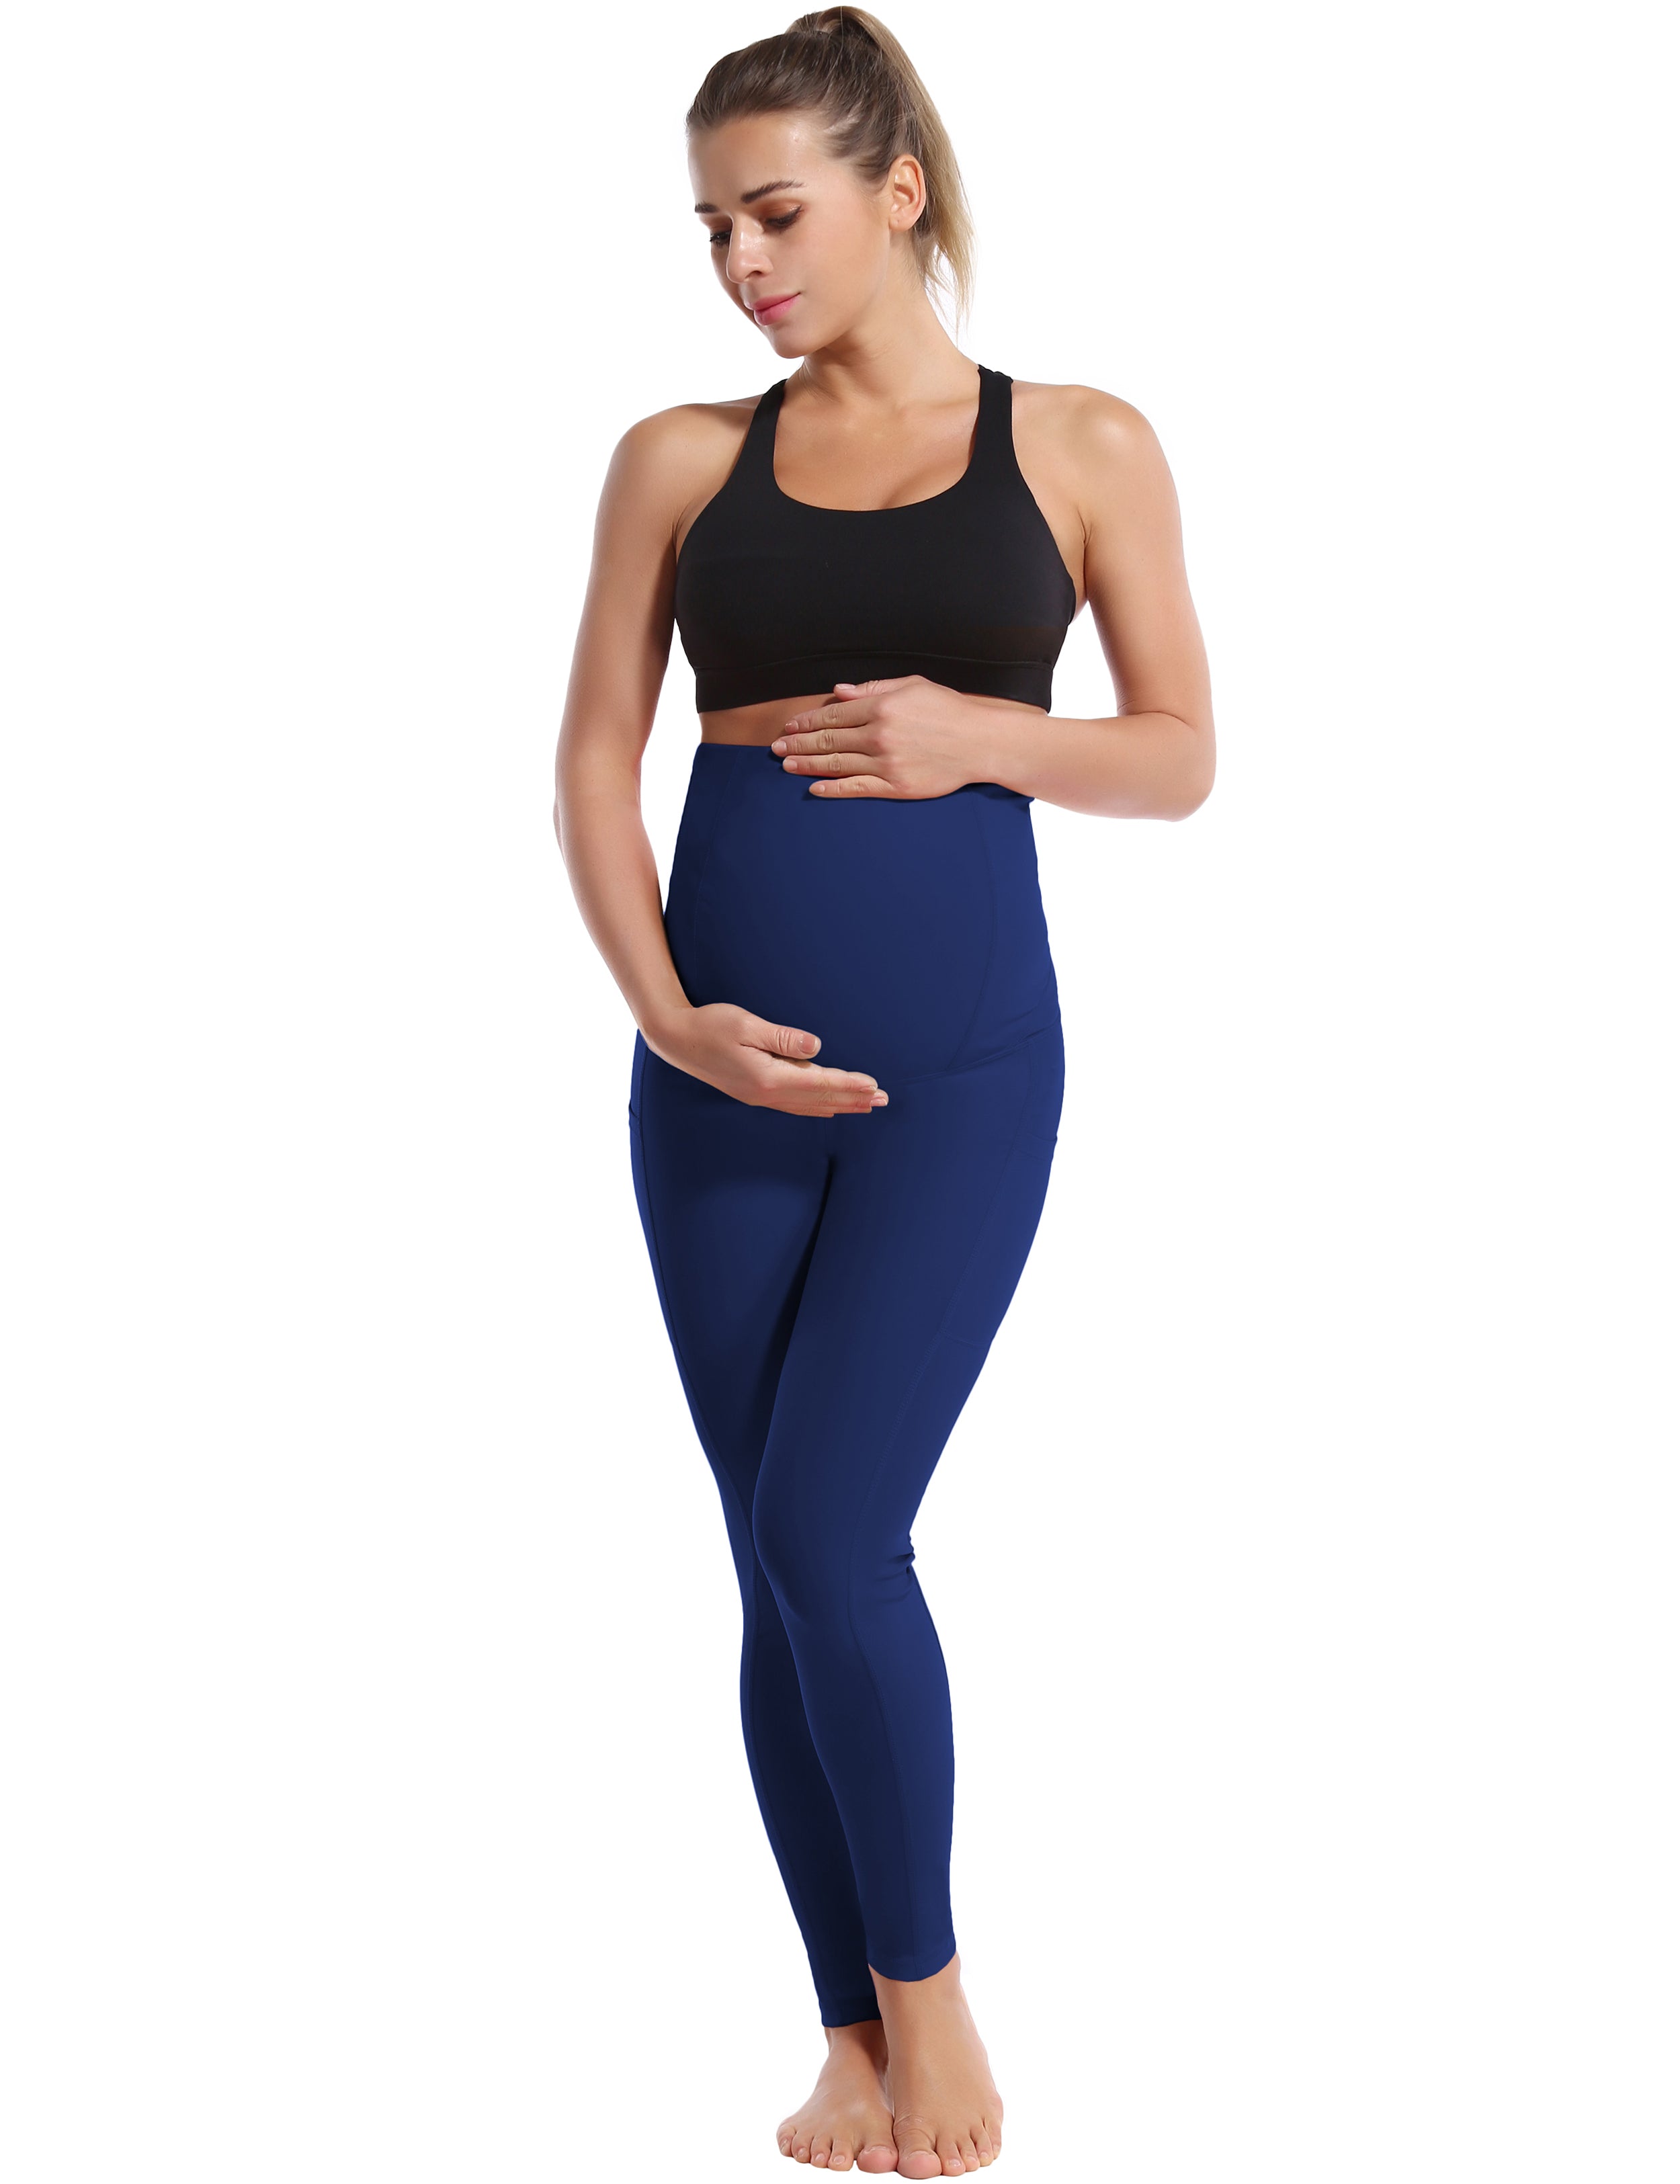 26" Side Pockets Maternity Yoga Pants navy 87%Nylon/13%Spandex Softest-ever fabric High elasticity 4-way stretch Fabric doesn't attract lint easily No see-through Moisture-wicking Machine wash